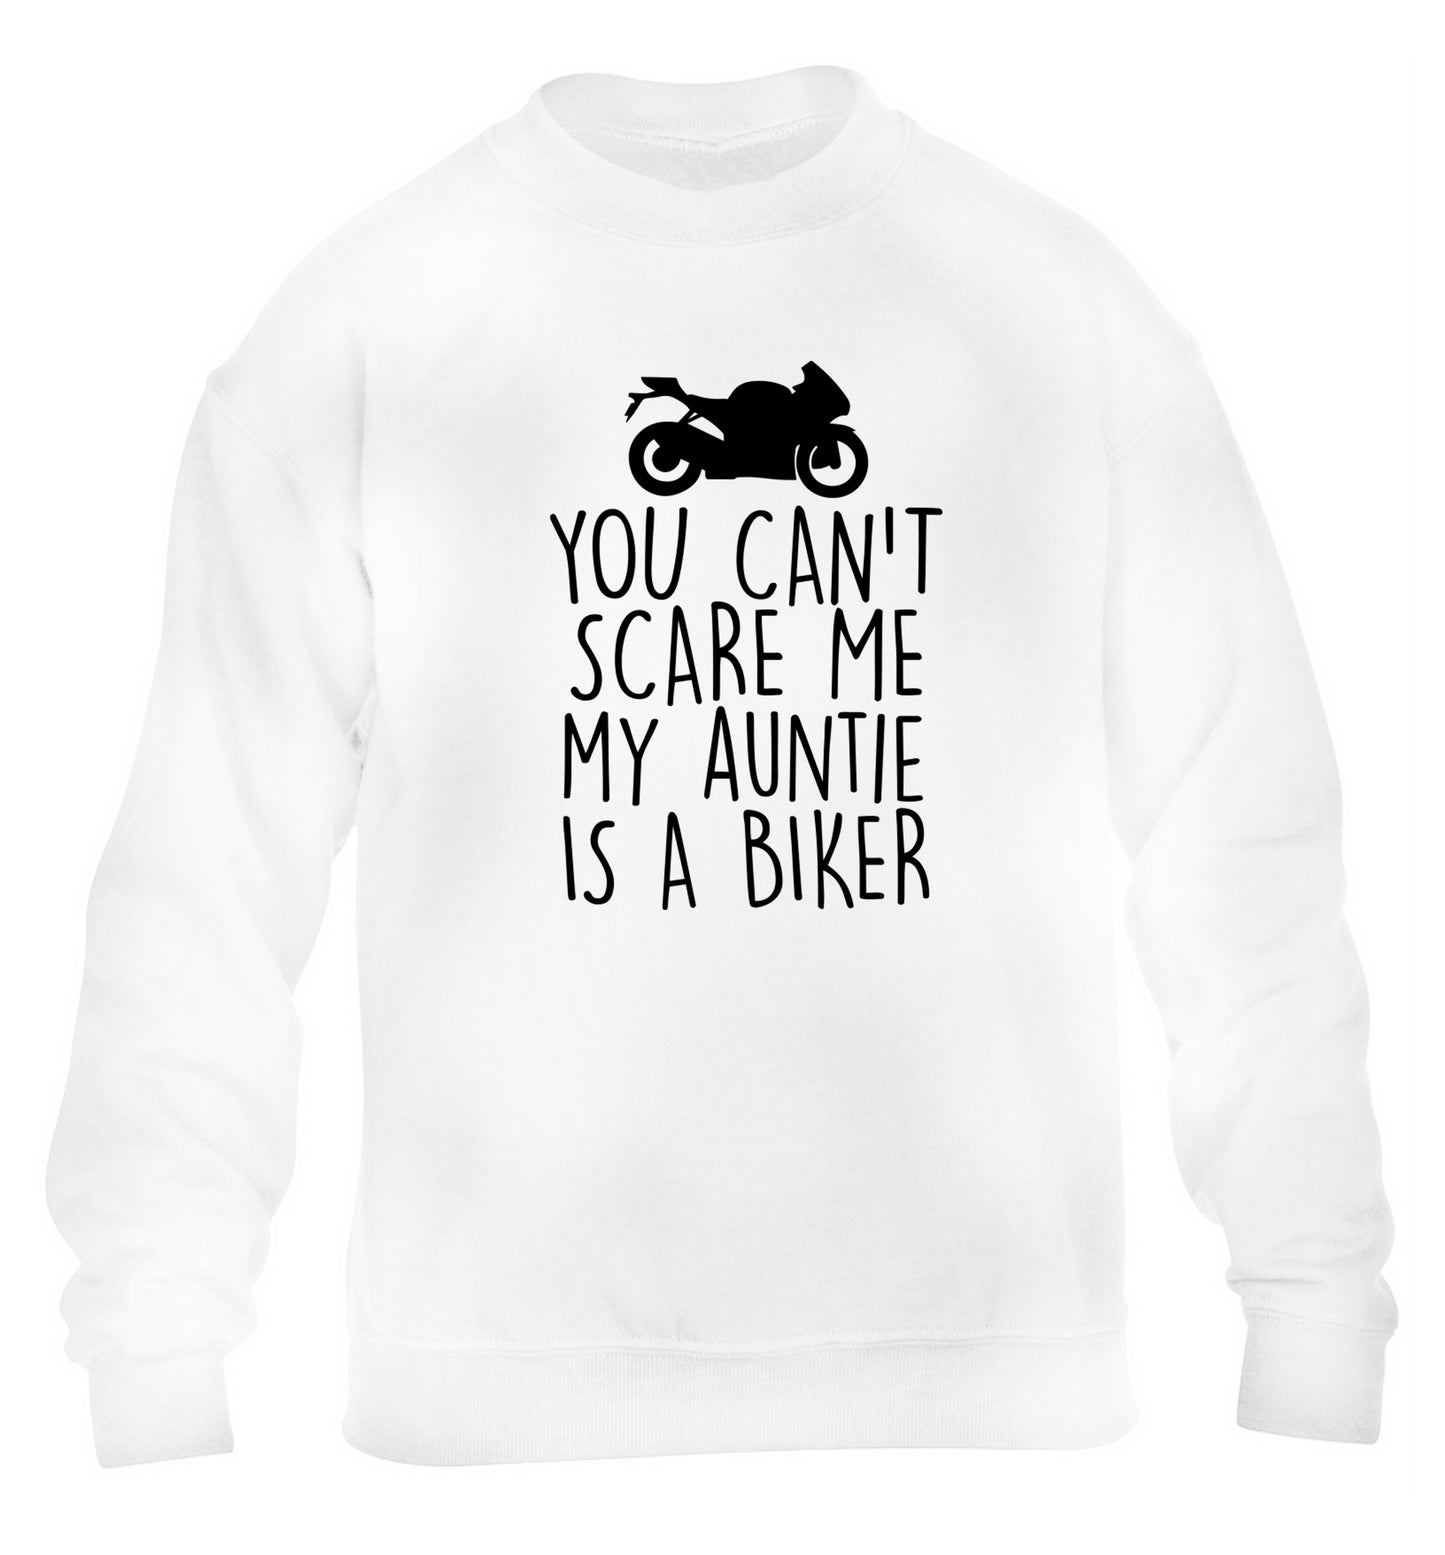 You can't scare me my auntie is a biker children's white sweater 12-13 Years